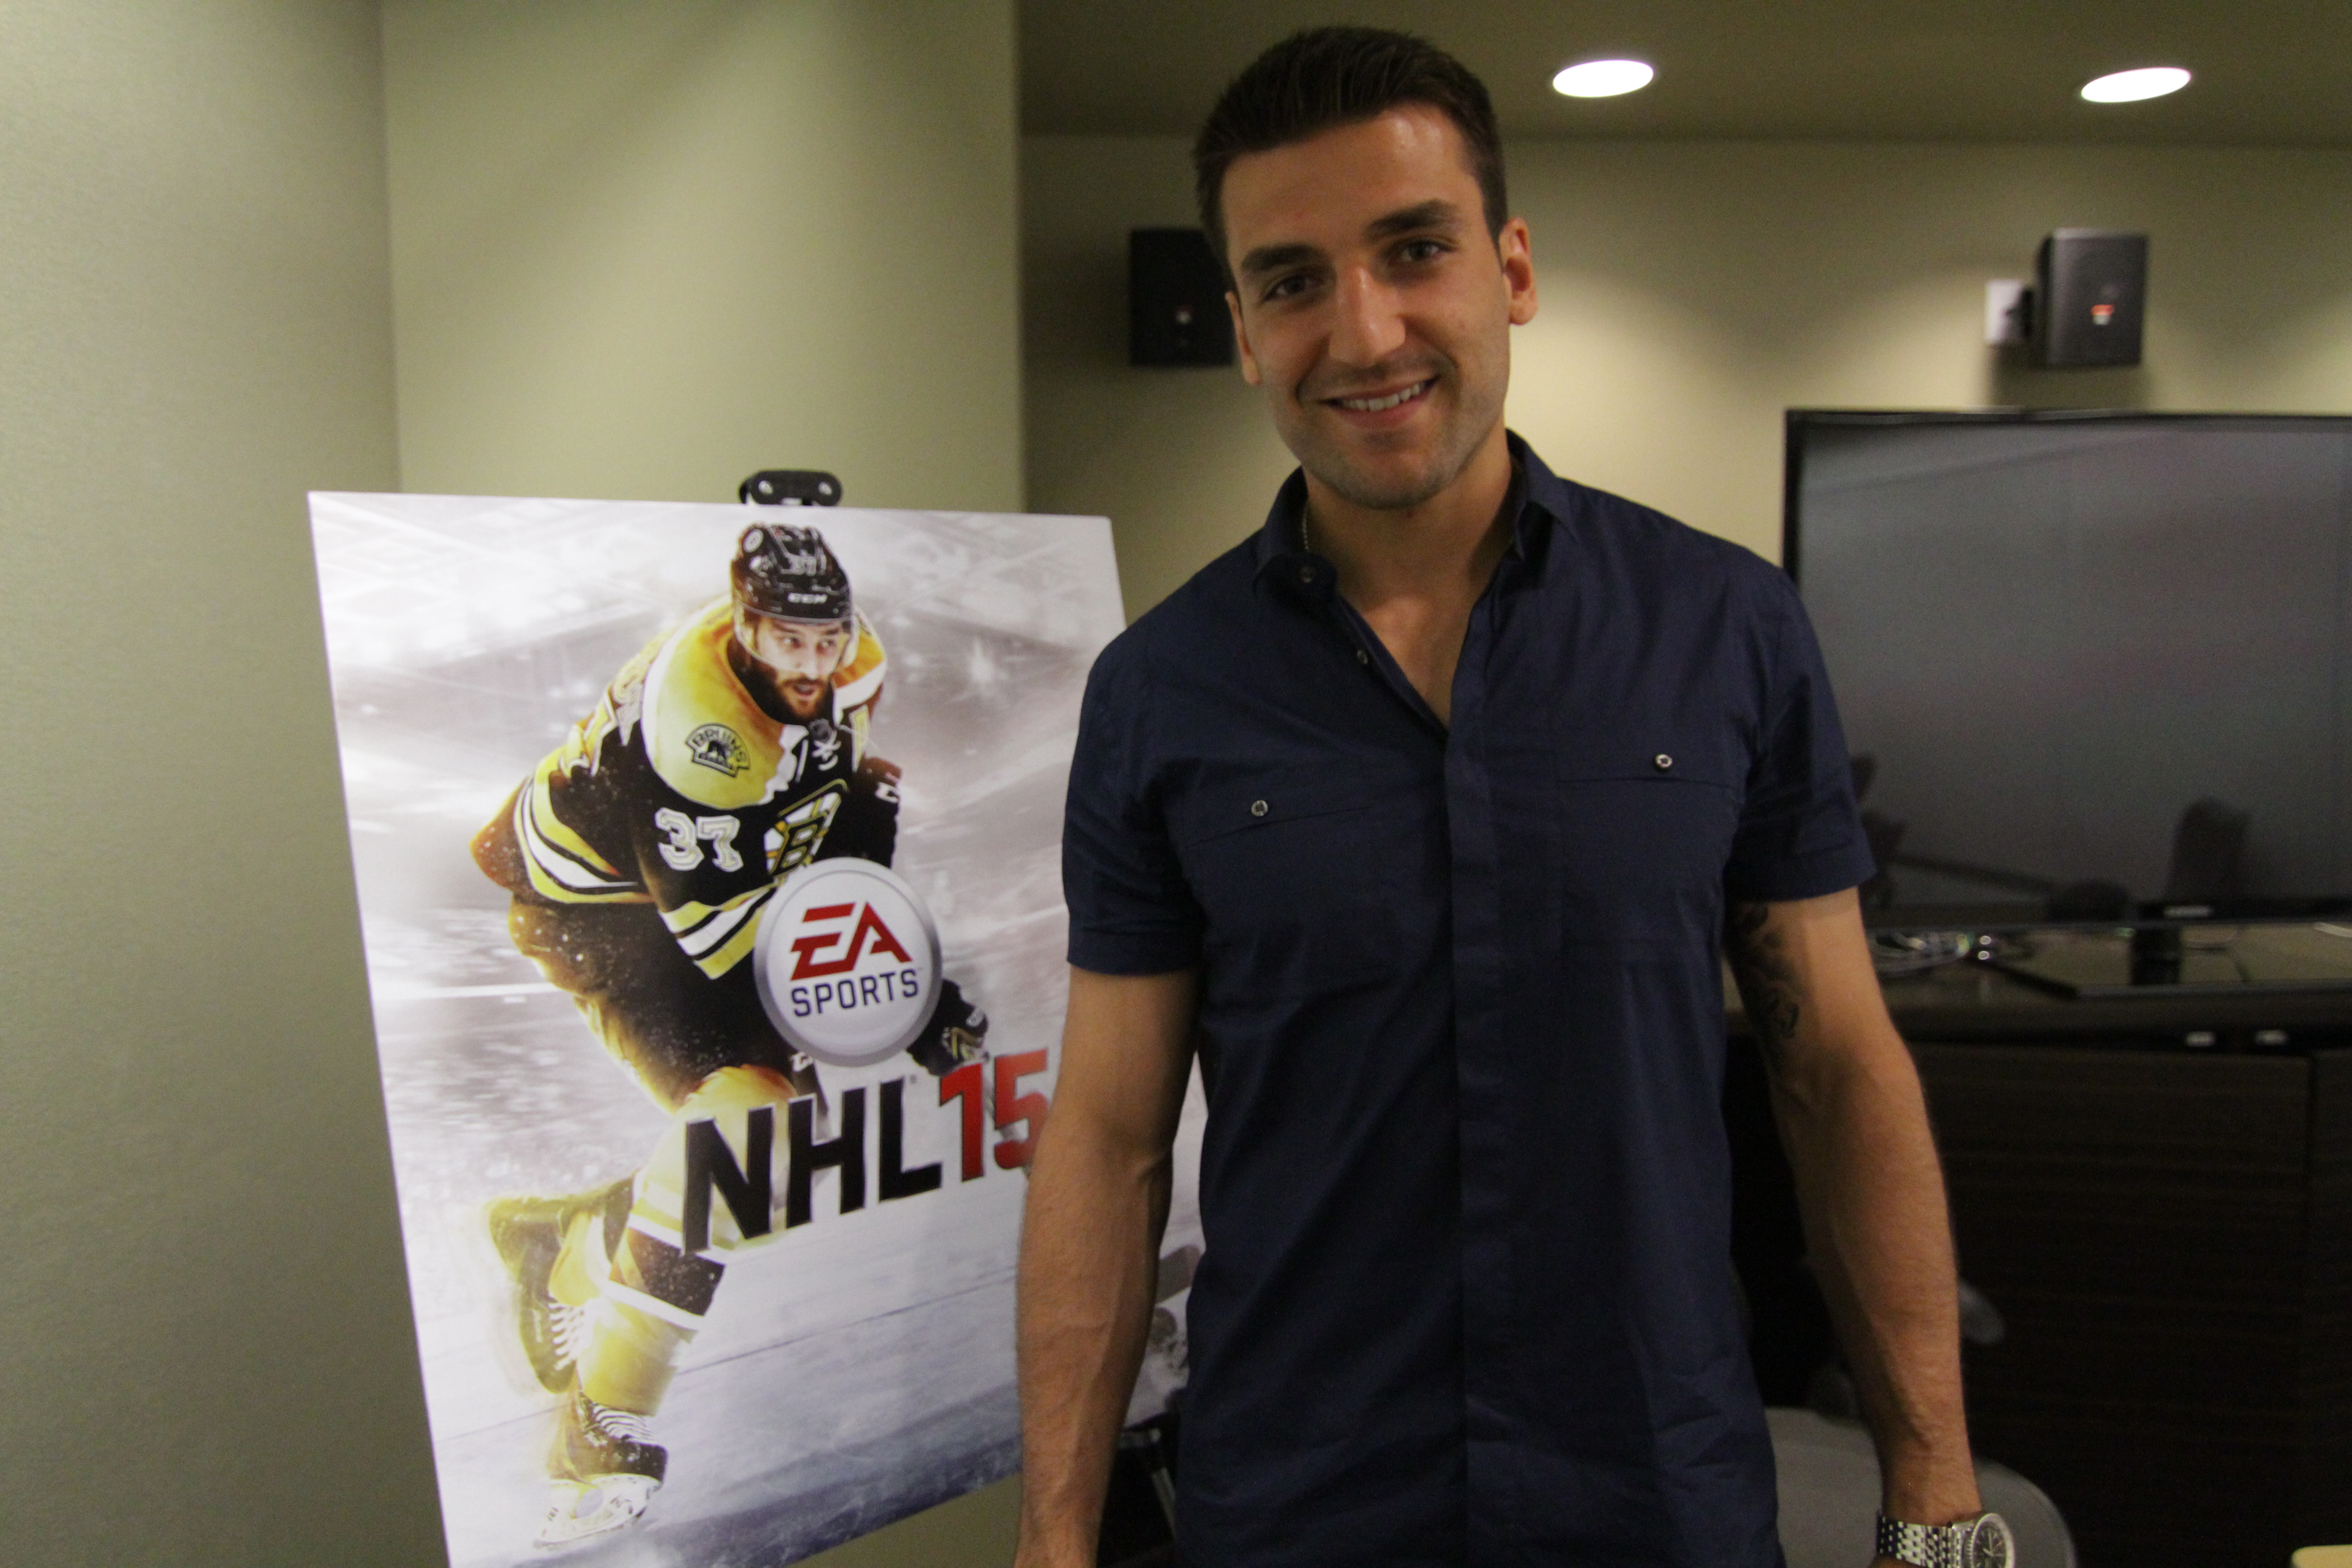 15 things that defined Patrice Bergeron's 19-year career with Bruins